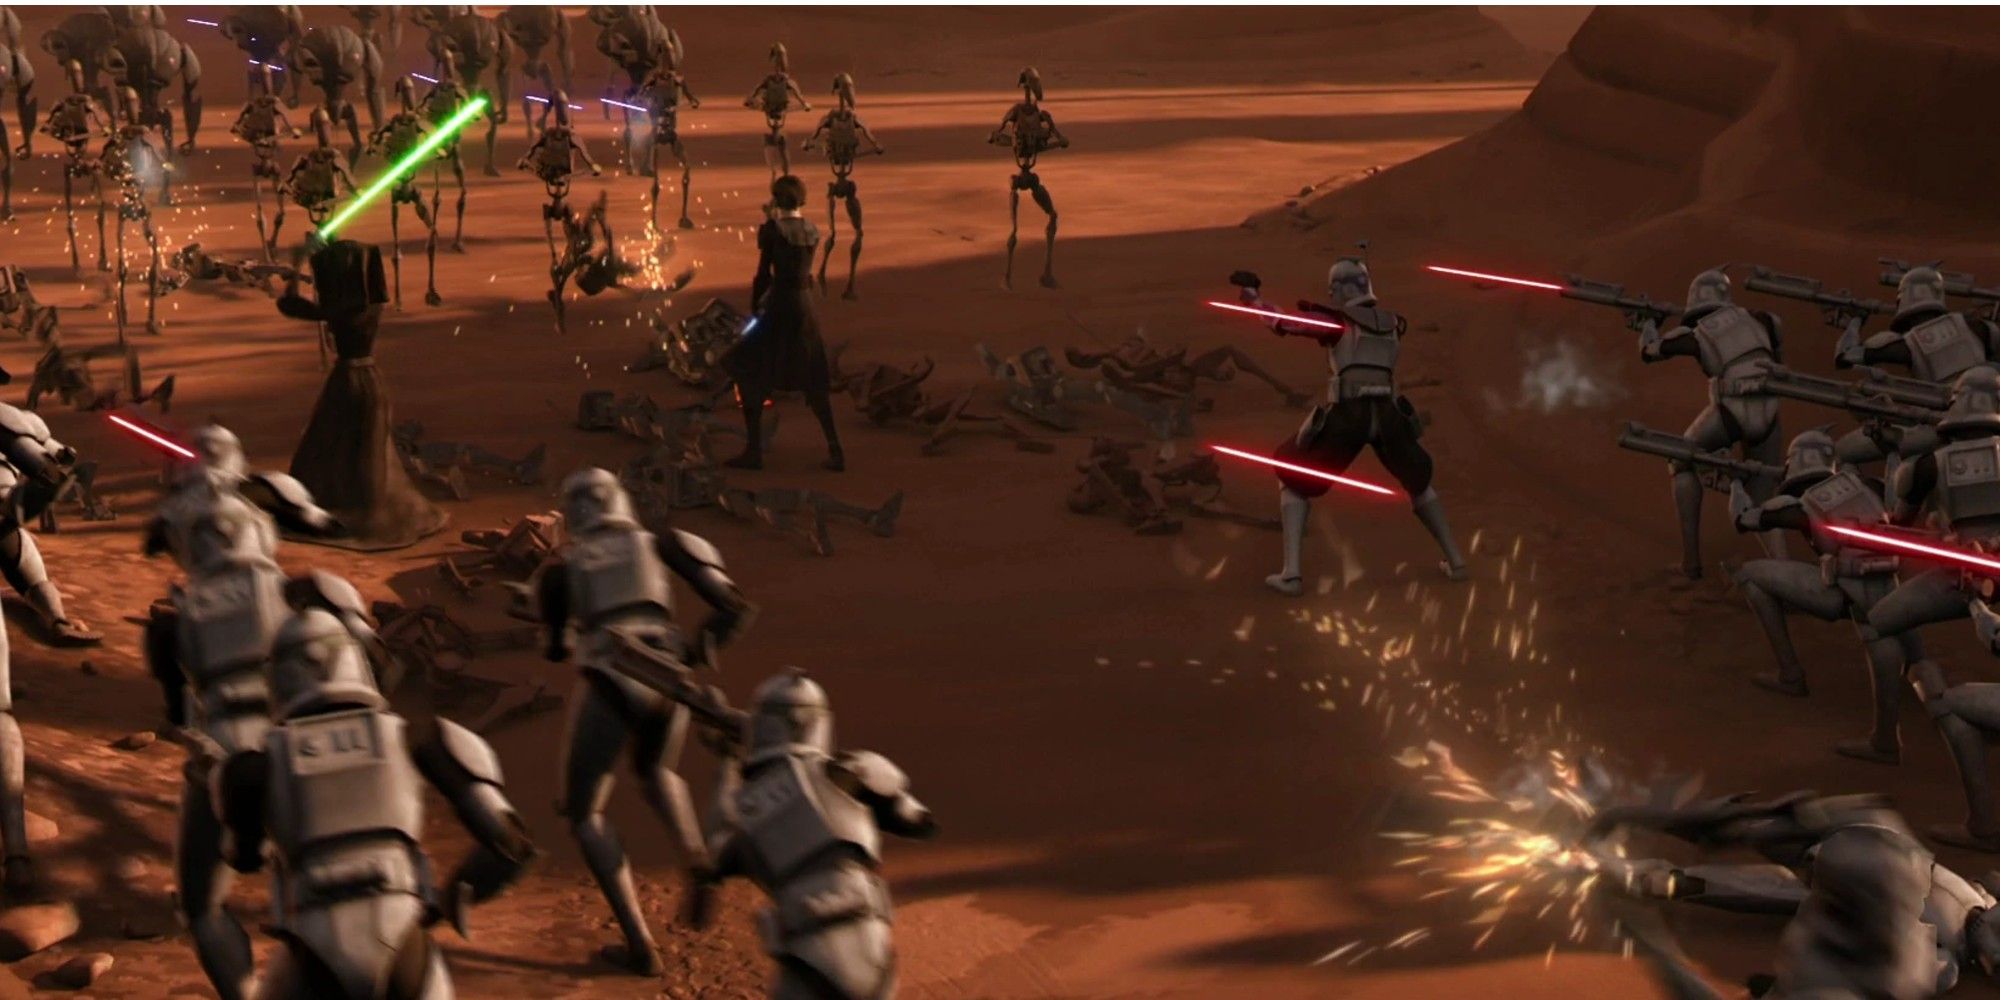 Second Battle of Geonosis from Star Wars The Clone Wars